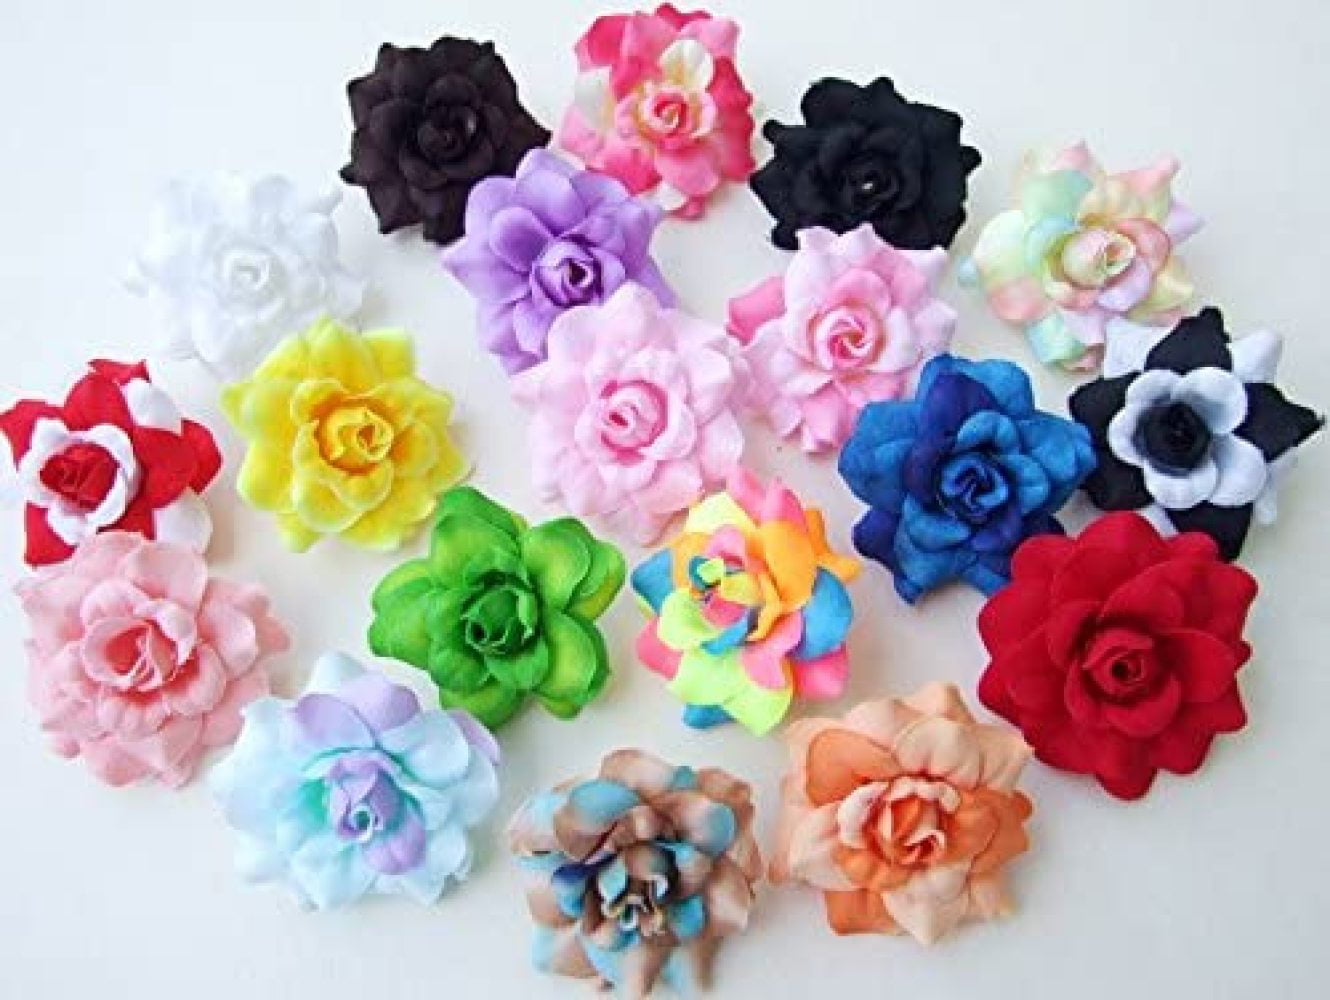 50pcs Vintage Soft Artificial Chic Hair Chiffon Fabric Flowers For Headbands 